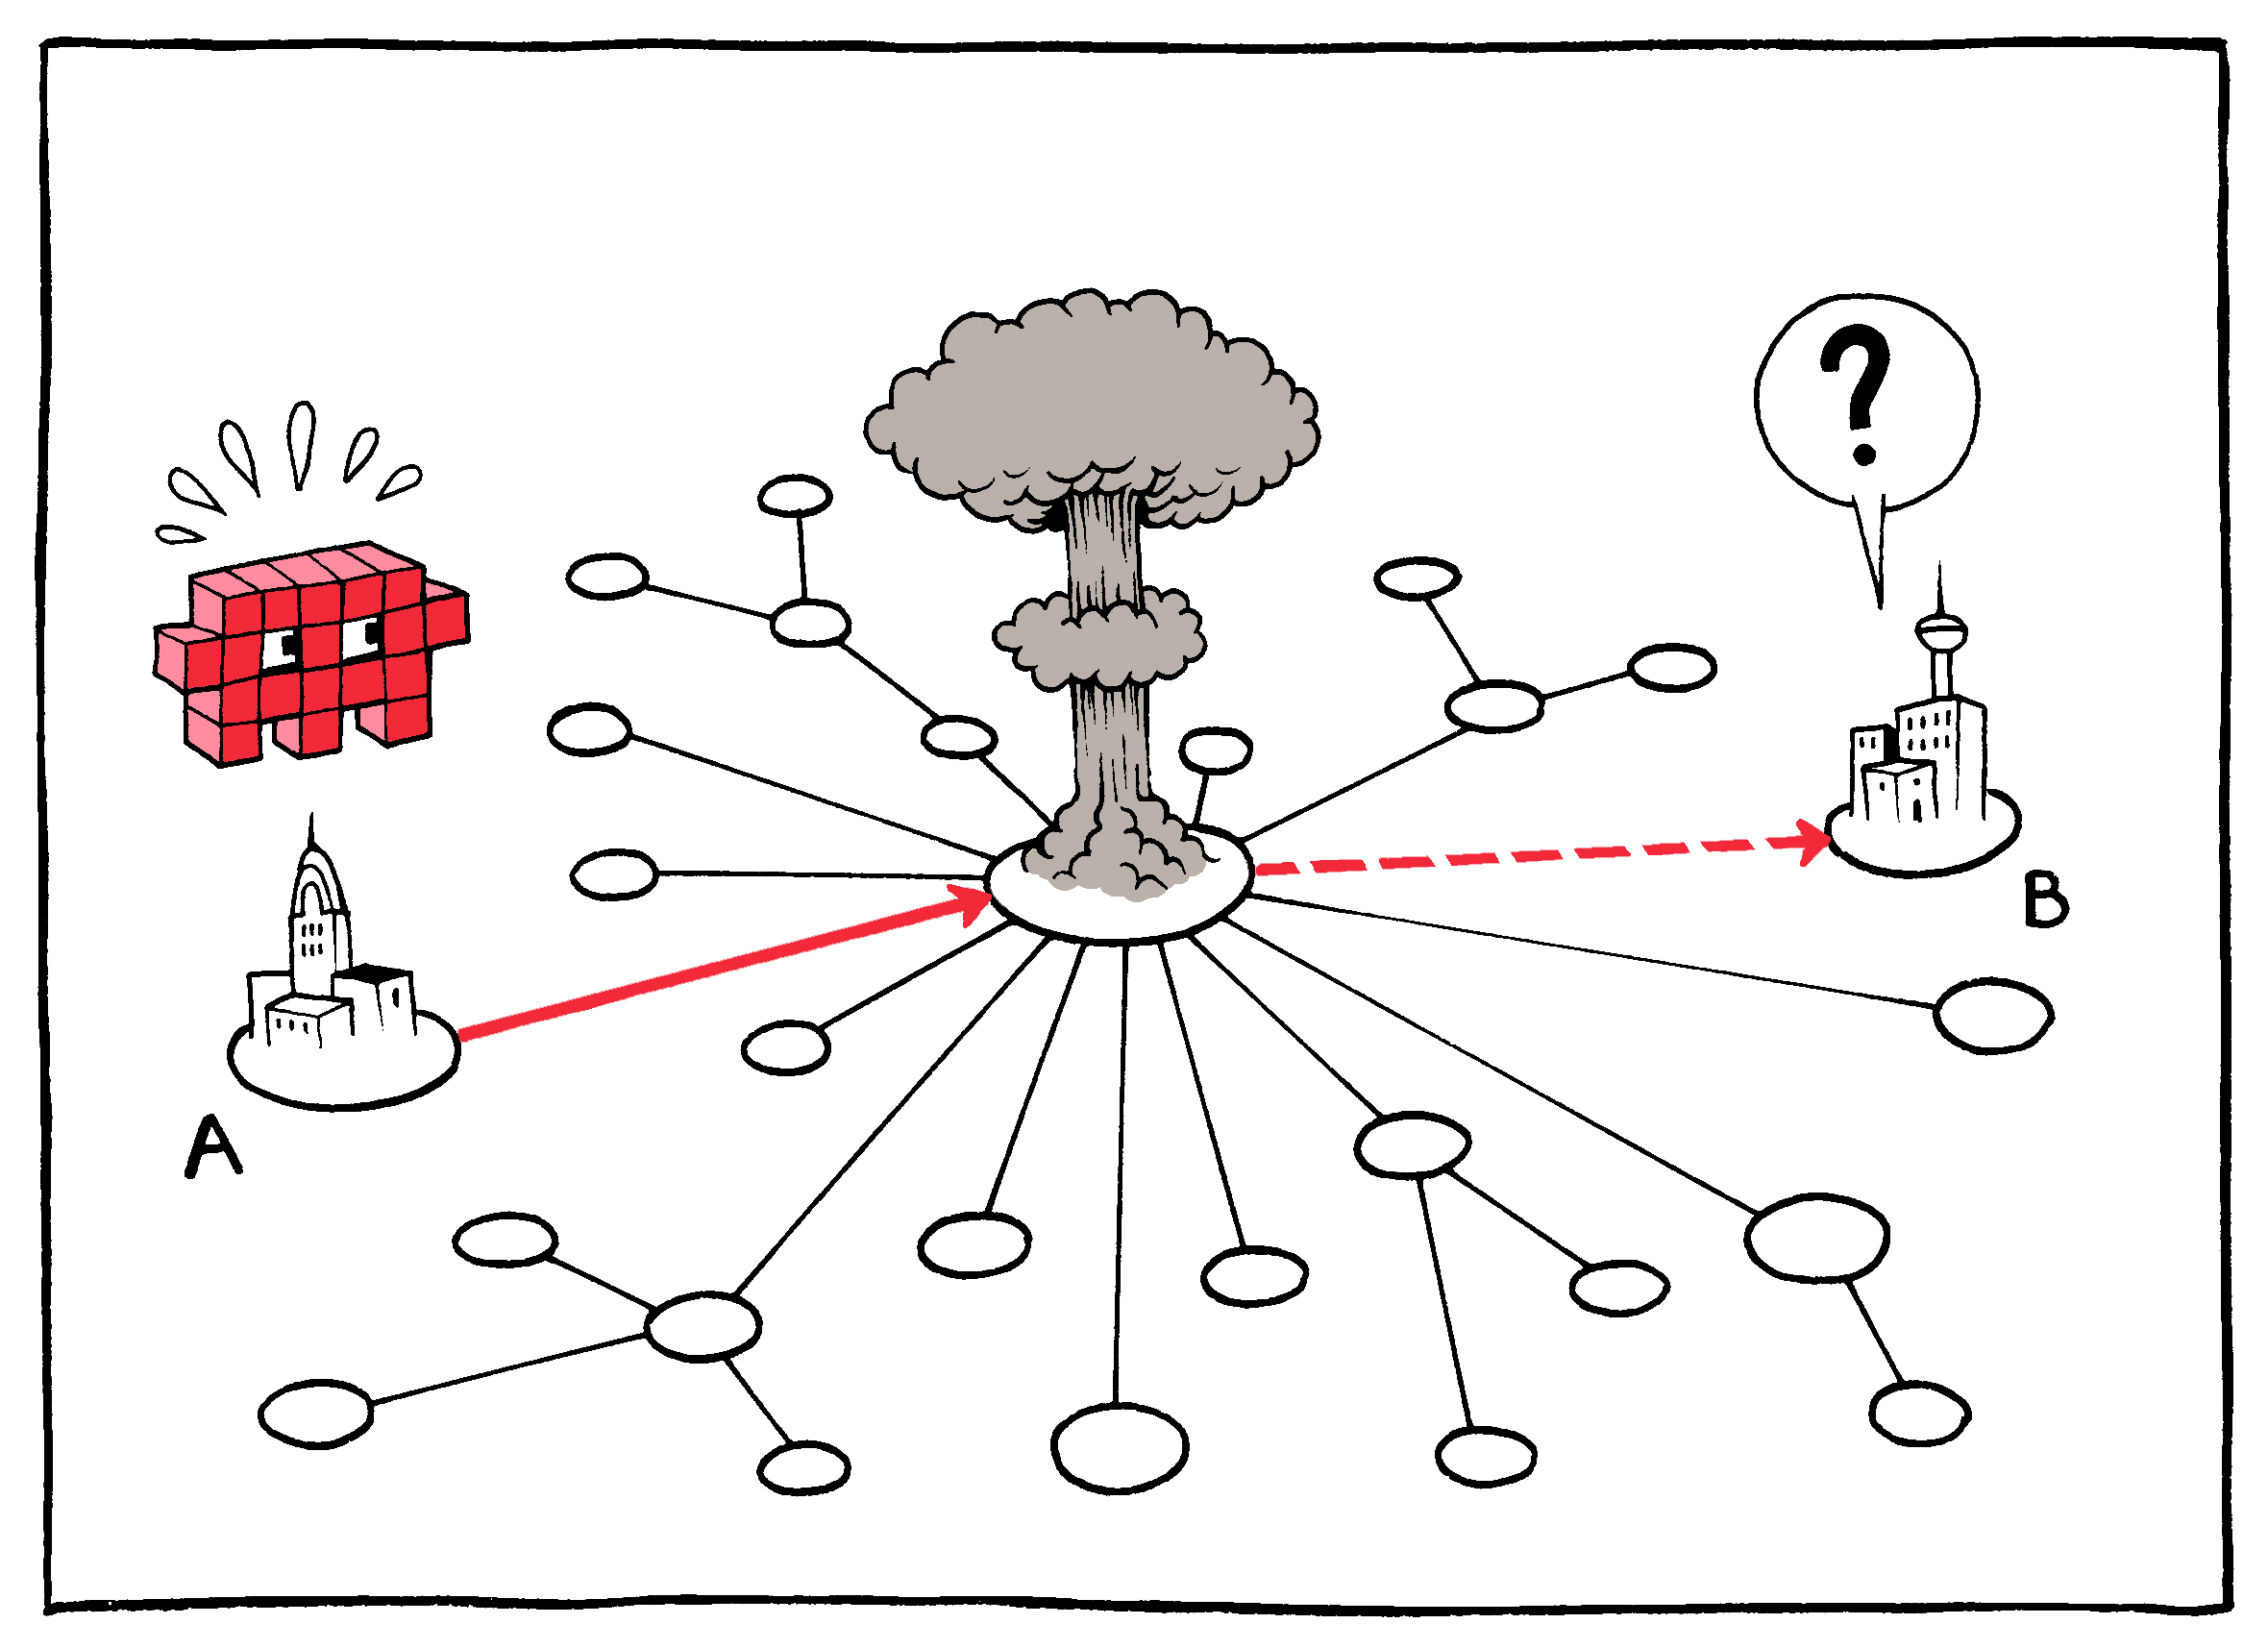 Centralized and decentralized networks fail quickly in the case of
malfunction or destruction.